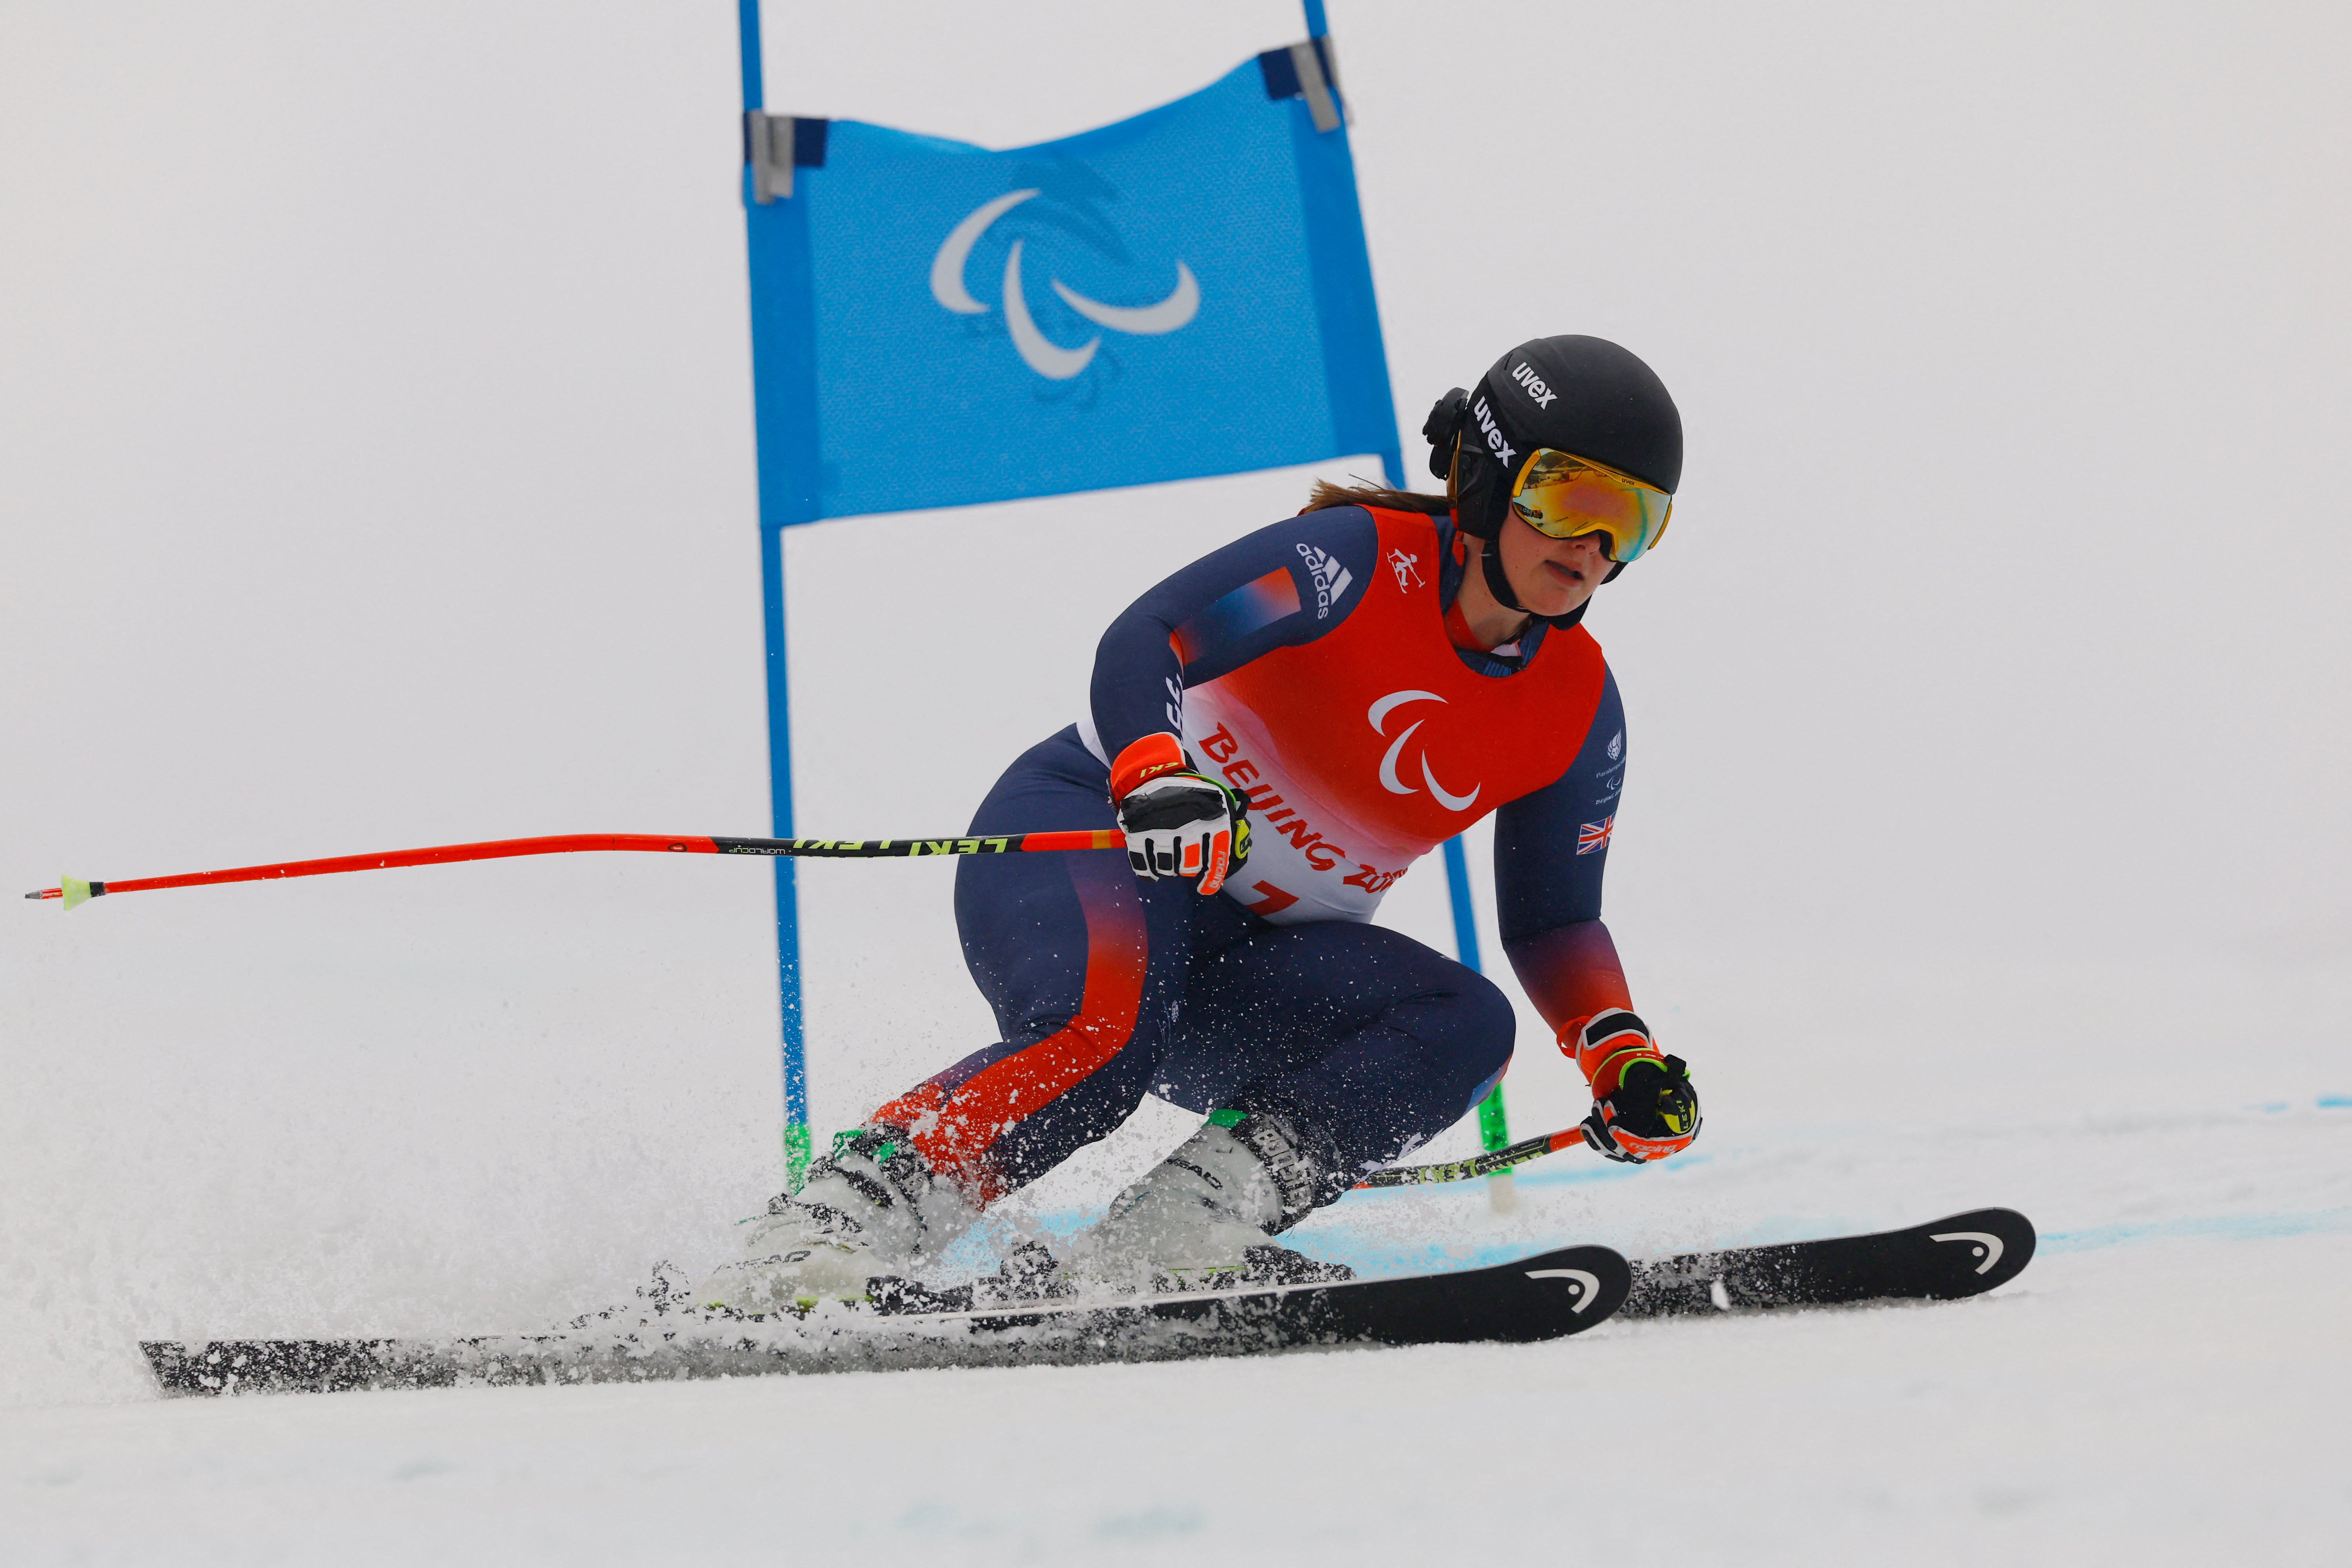 Millie Knight came ninth in the giant slalom on Friday